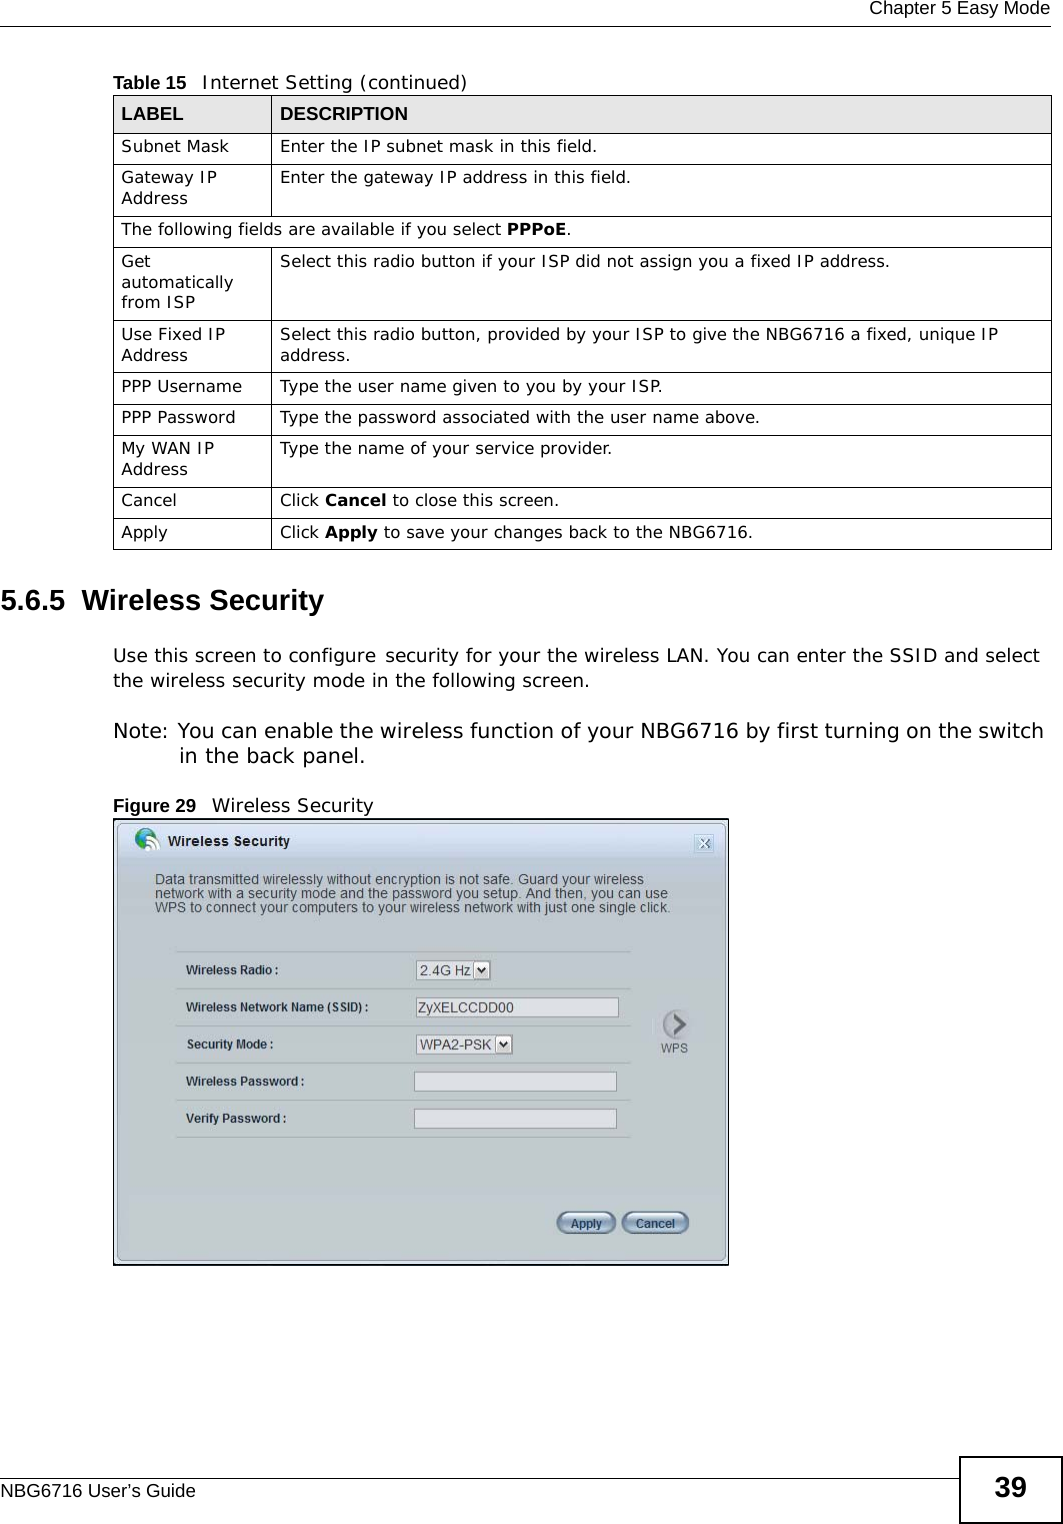  Chapter 5 Easy ModeNBG6716 User’s Guide 395.6.5  Wireless SecurityUse this screen to configure security for your the wireless LAN. You can enter the SSID and select the wireless security mode in the following screen.Note: You can enable the wireless function of your NBG6716 by first turning on the switch in the back panel.Figure 29   Wireless SecuritySubnet Mask Enter the IP subnet mask in this field.Gateway IP Address Enter the gateway IP address in this field.The following fields are available if you select PPPoE.Get automatically from ISPSelect this radio button if your ISP did not assign you a fixed IP address.Use Fixed IP Address Select this radio button, provided by your ISP to give the NBG6716 a fixed, unique IP address.PPP Username Type the user name given to you by your ISP. PPP Password  Type the password associated with the user name above.My WAN IP Address Type the name of your service provider.Cancel Click Cancel to close this screen.Apply Click Apply to save your changes back to the NBG6716.Table 15   Internet Setting (continued)LABEL DESCRIPTION